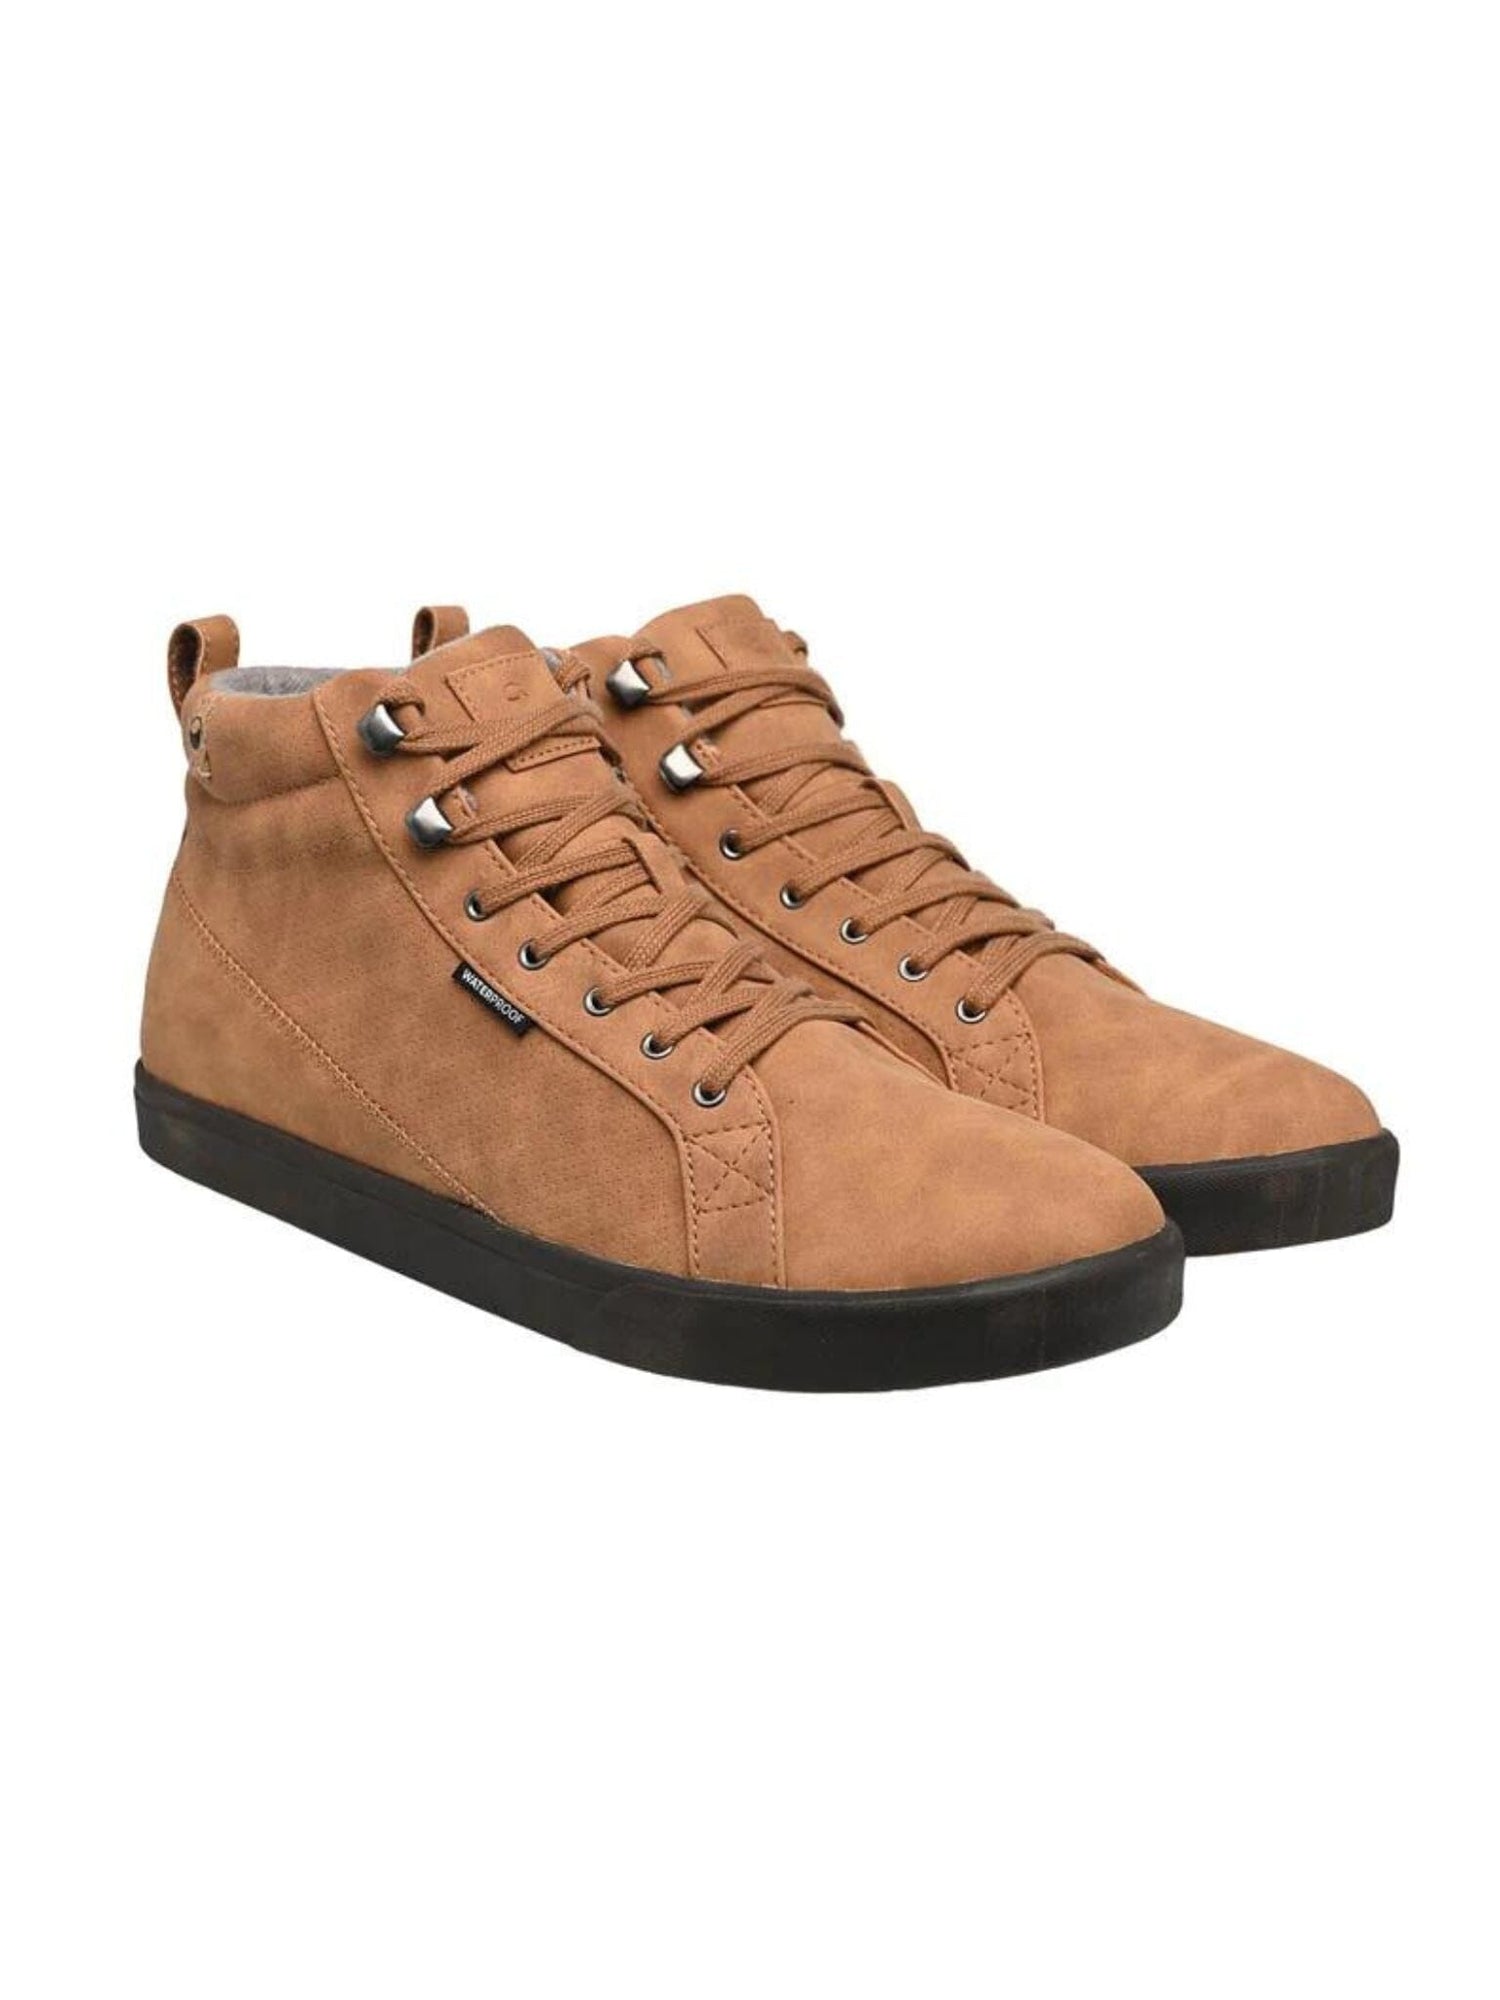 Saola M's Wanaka Waterproof Sneakers - Recycled PET and Bio-sourced materials Camel Shoes